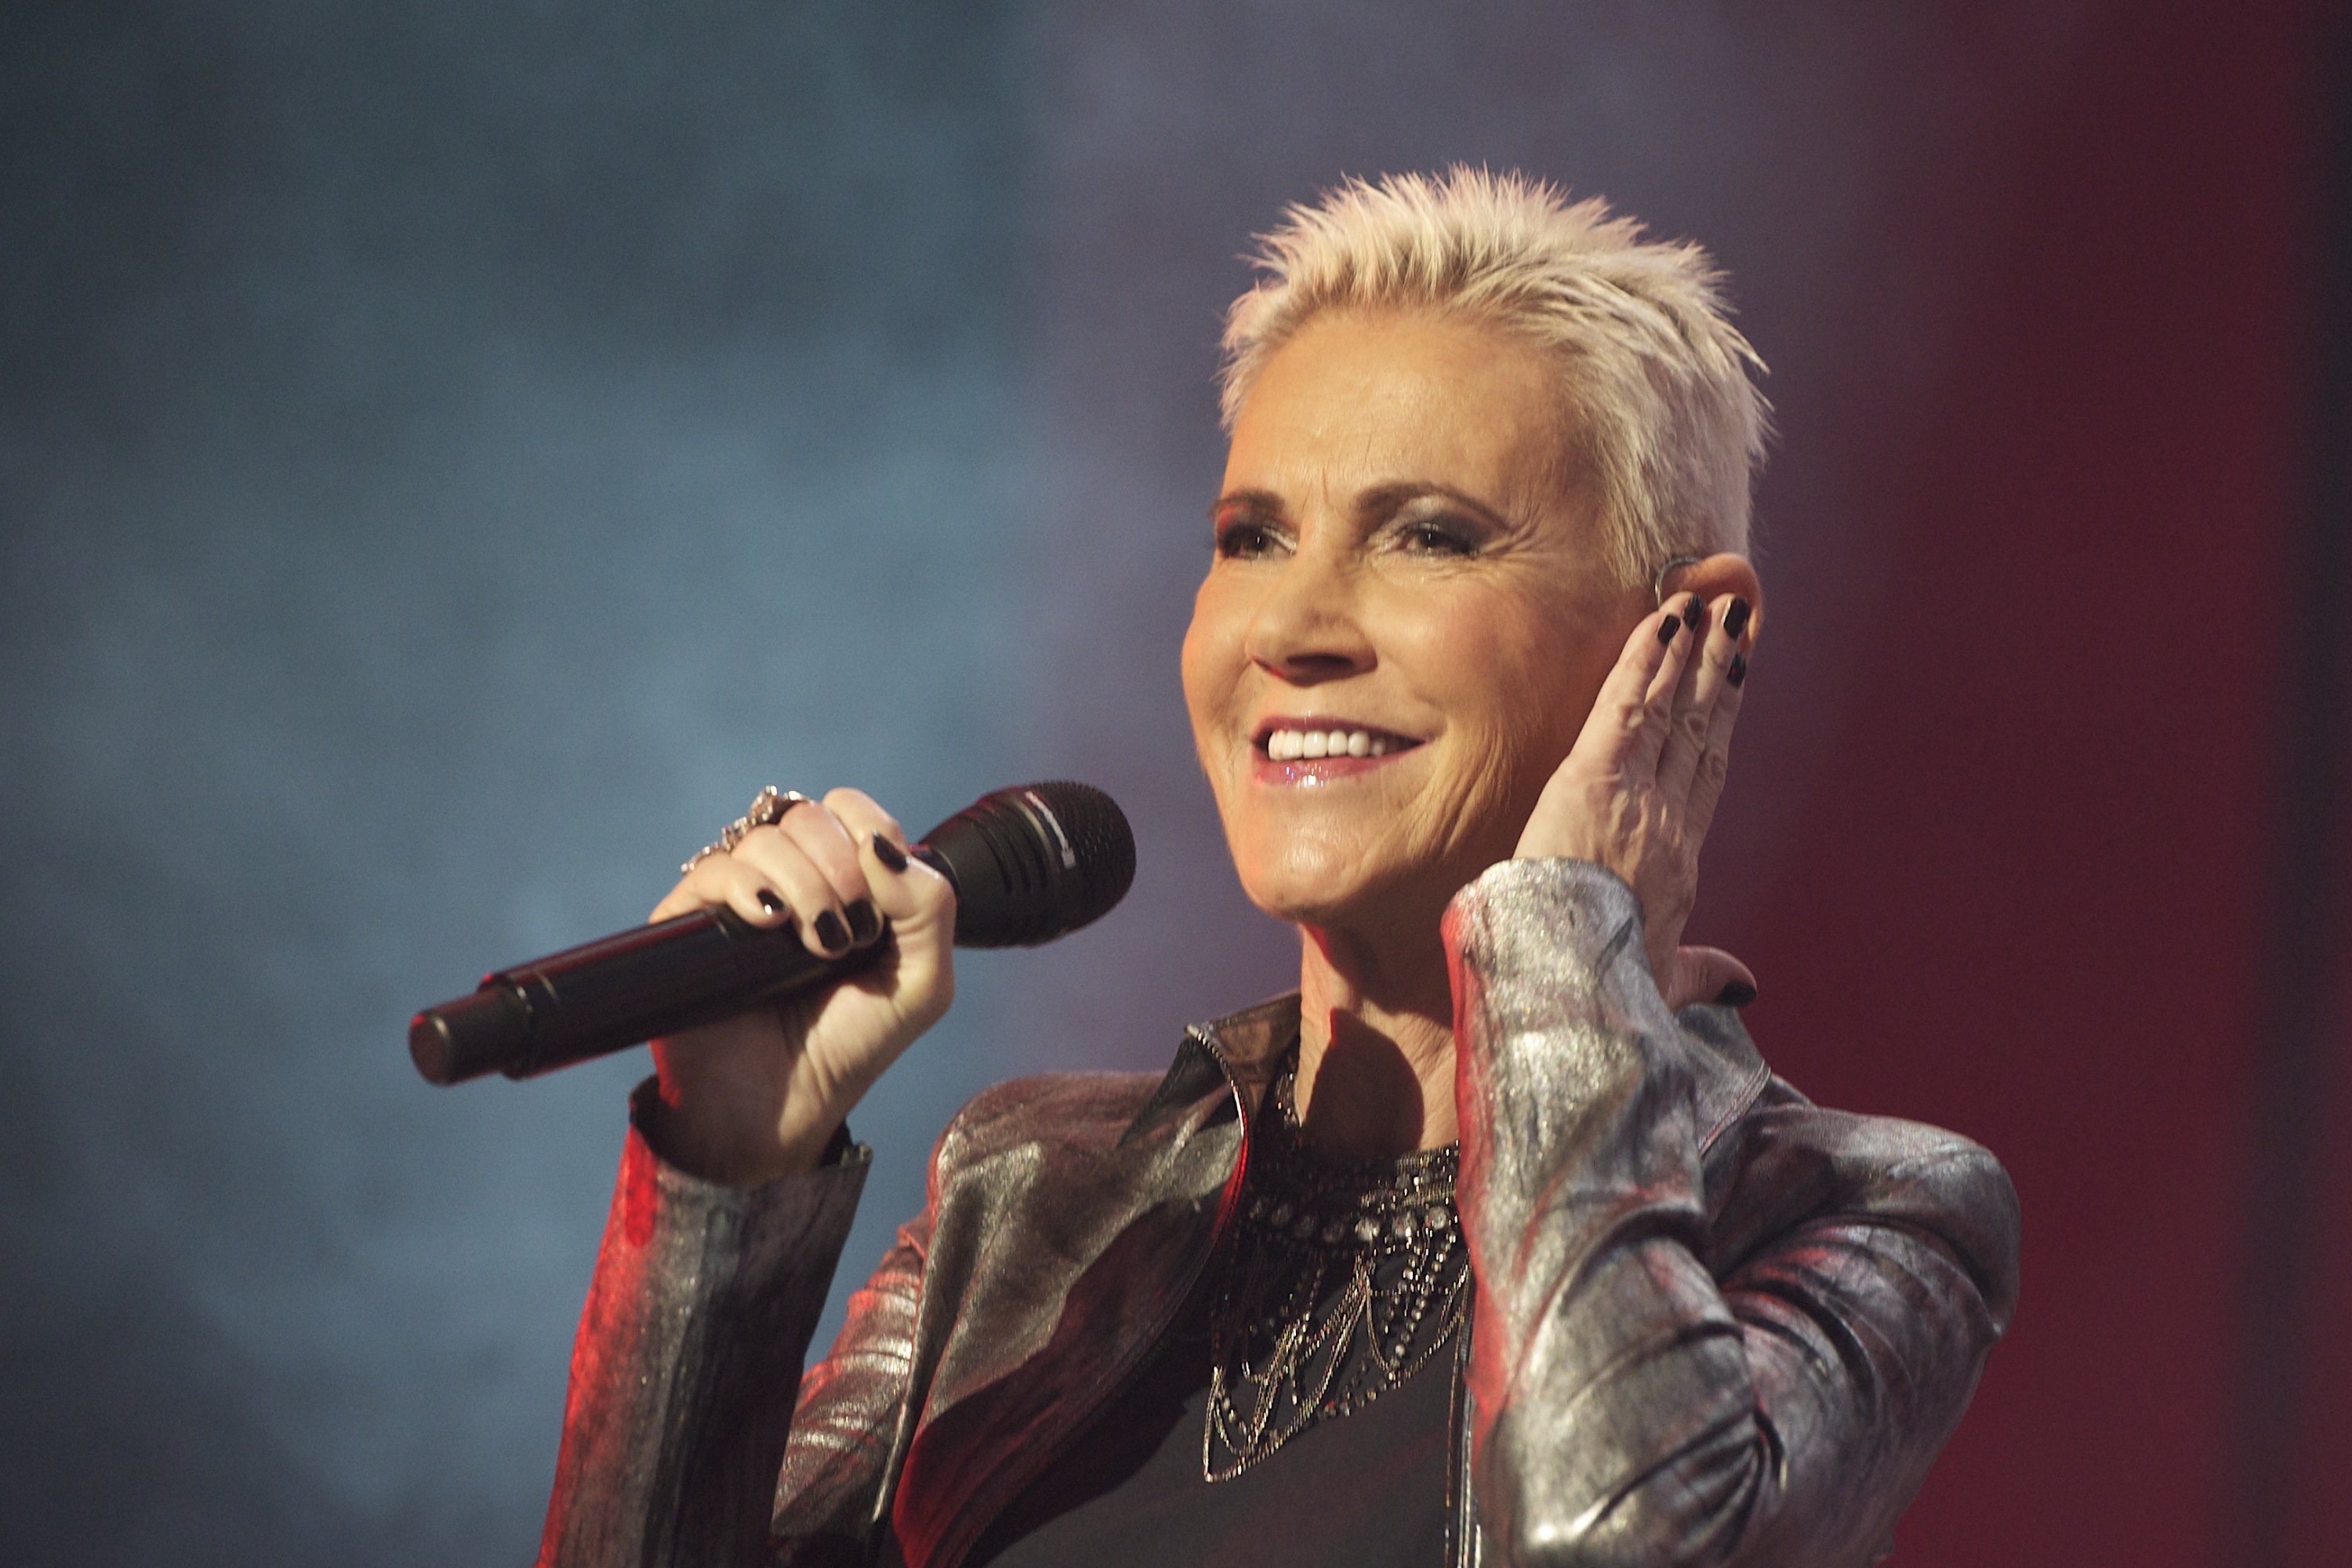 Marie Fredriksson of Roxette at Palacio de Vistalegre on November 18, 2011 in Madrid, Spain | Photo: Getty Images